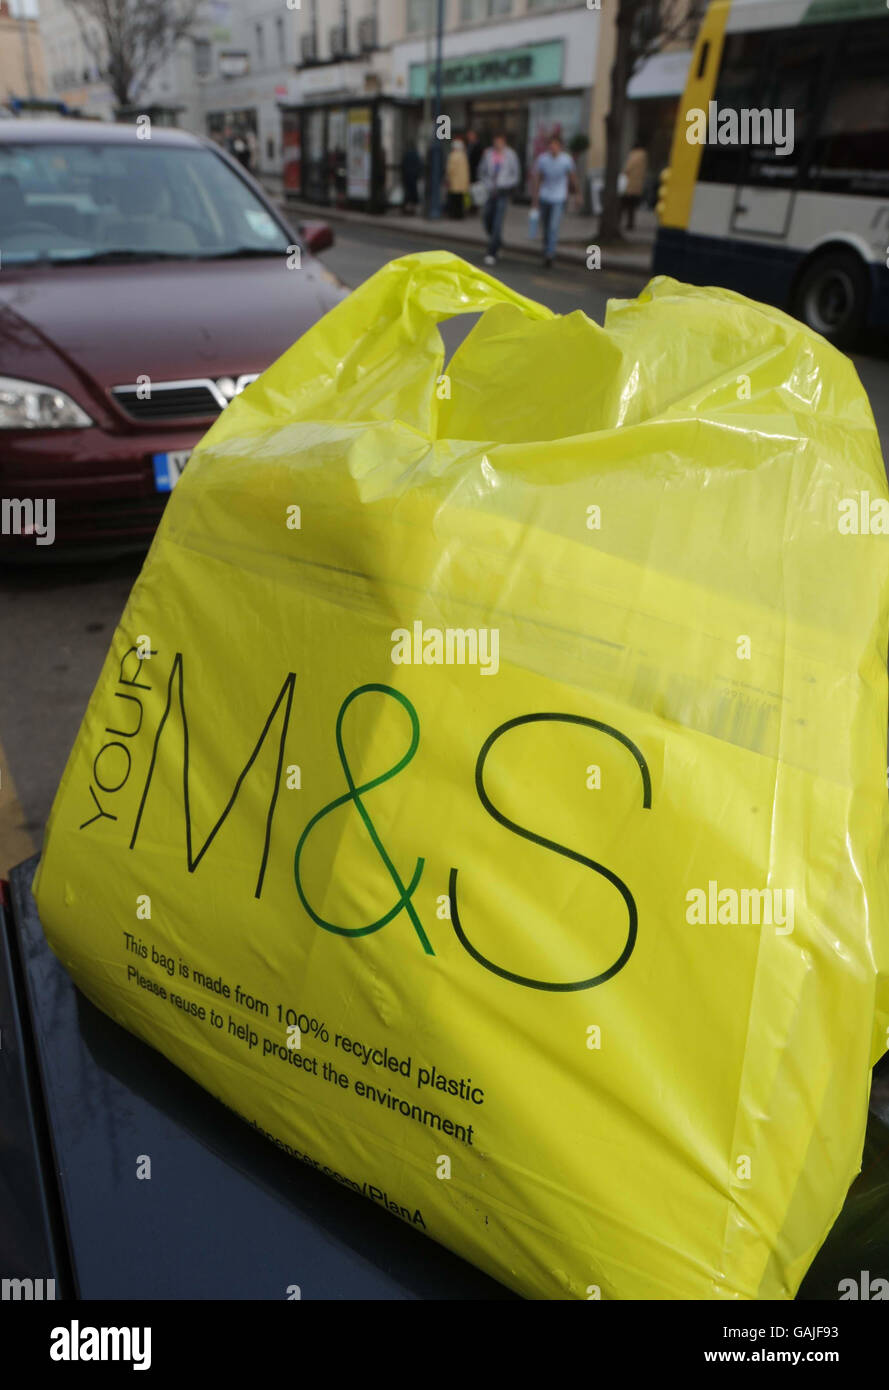 A 5p M&S carrier bag bought in a store in Cheltenham Stock Photo - Alamy